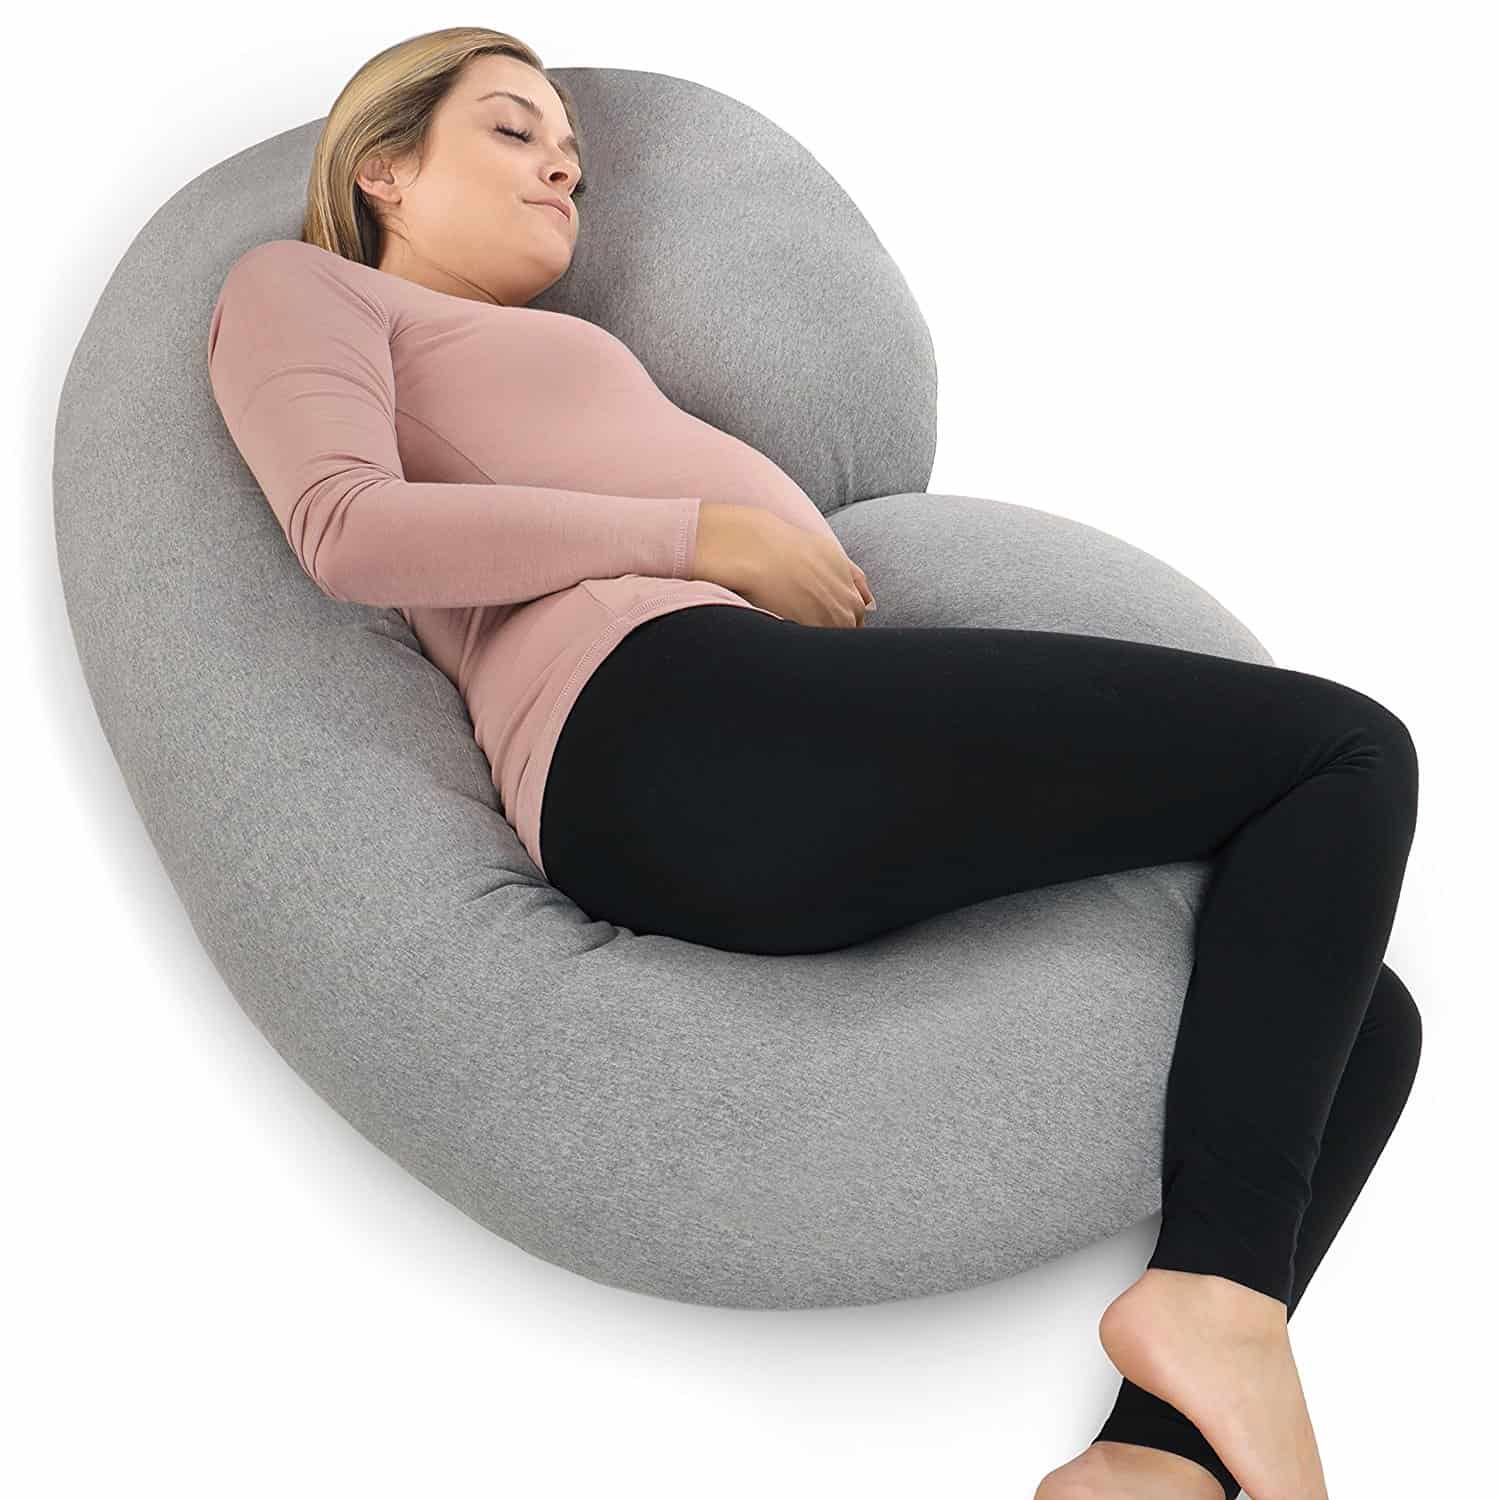 best wedge pillow for pregnancy